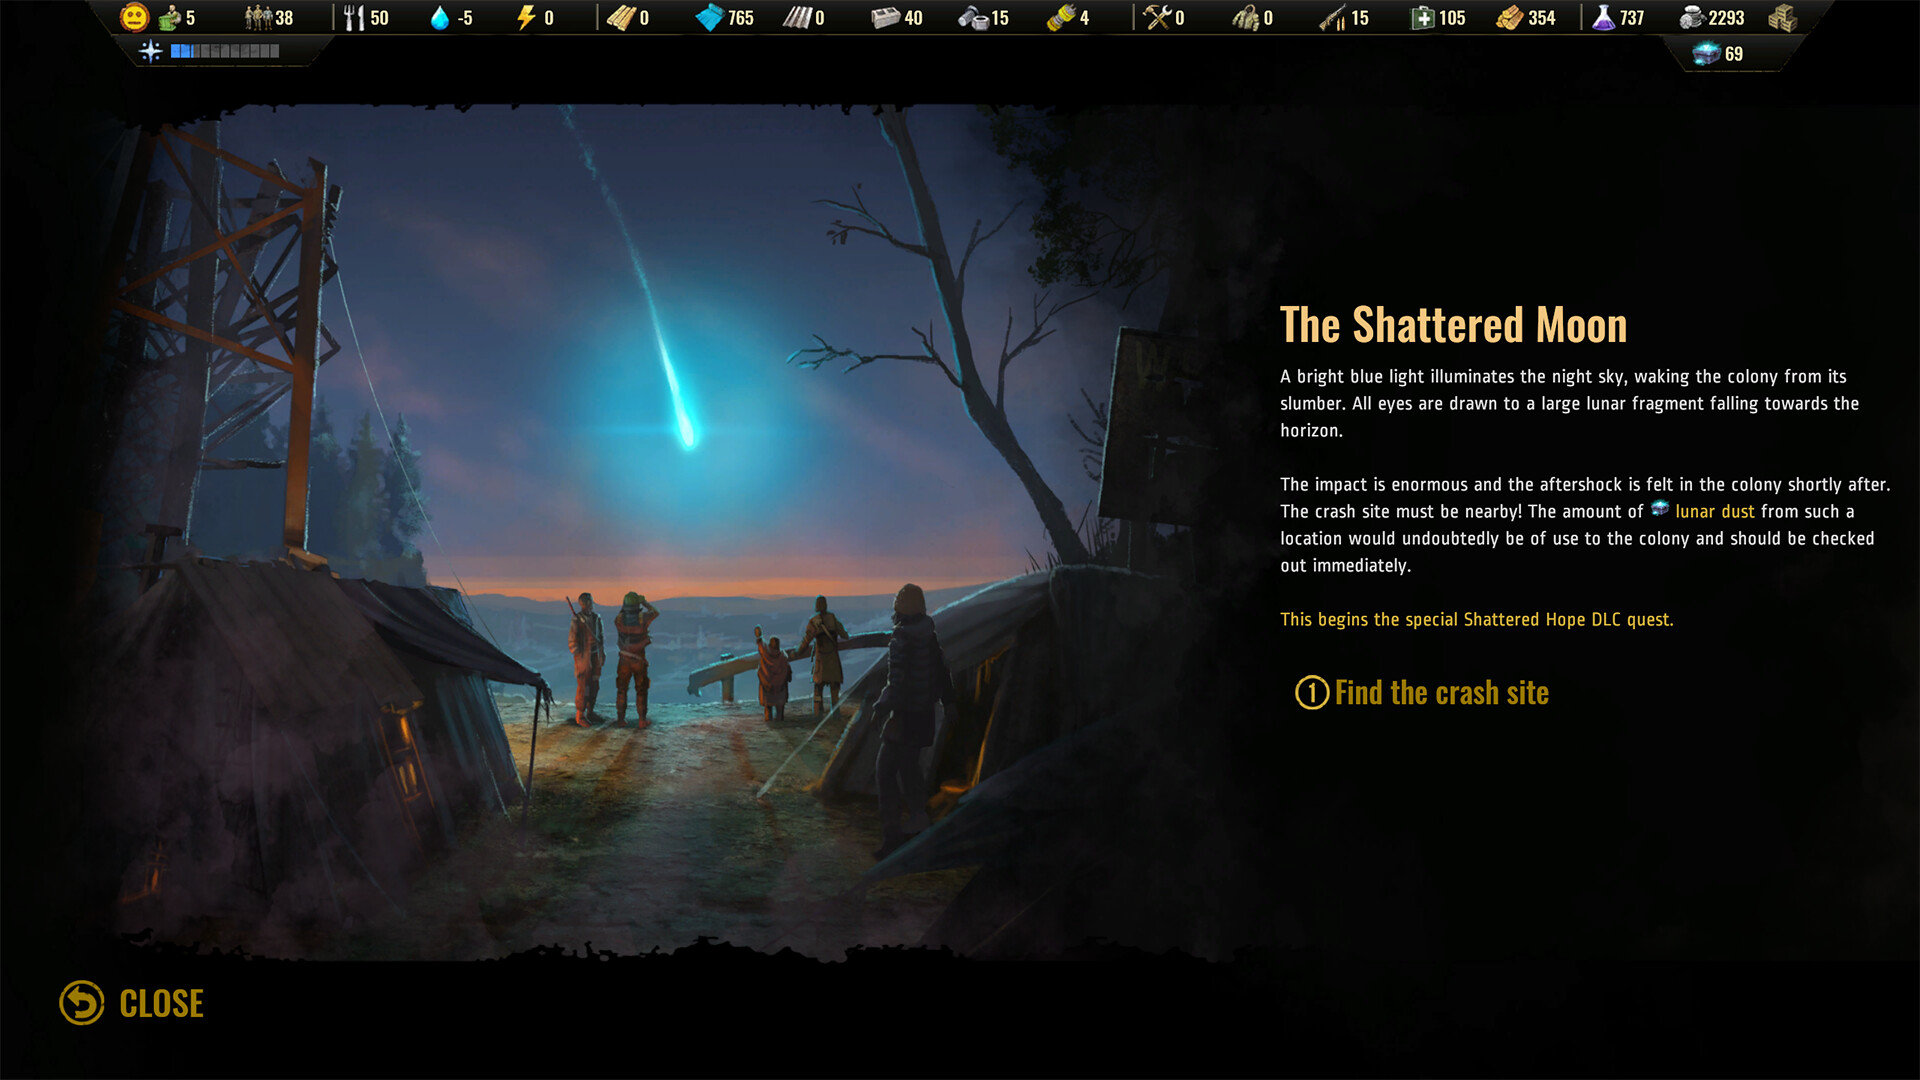 Surviving The Aftermath - Shattered Hope DLC Steam CD Key